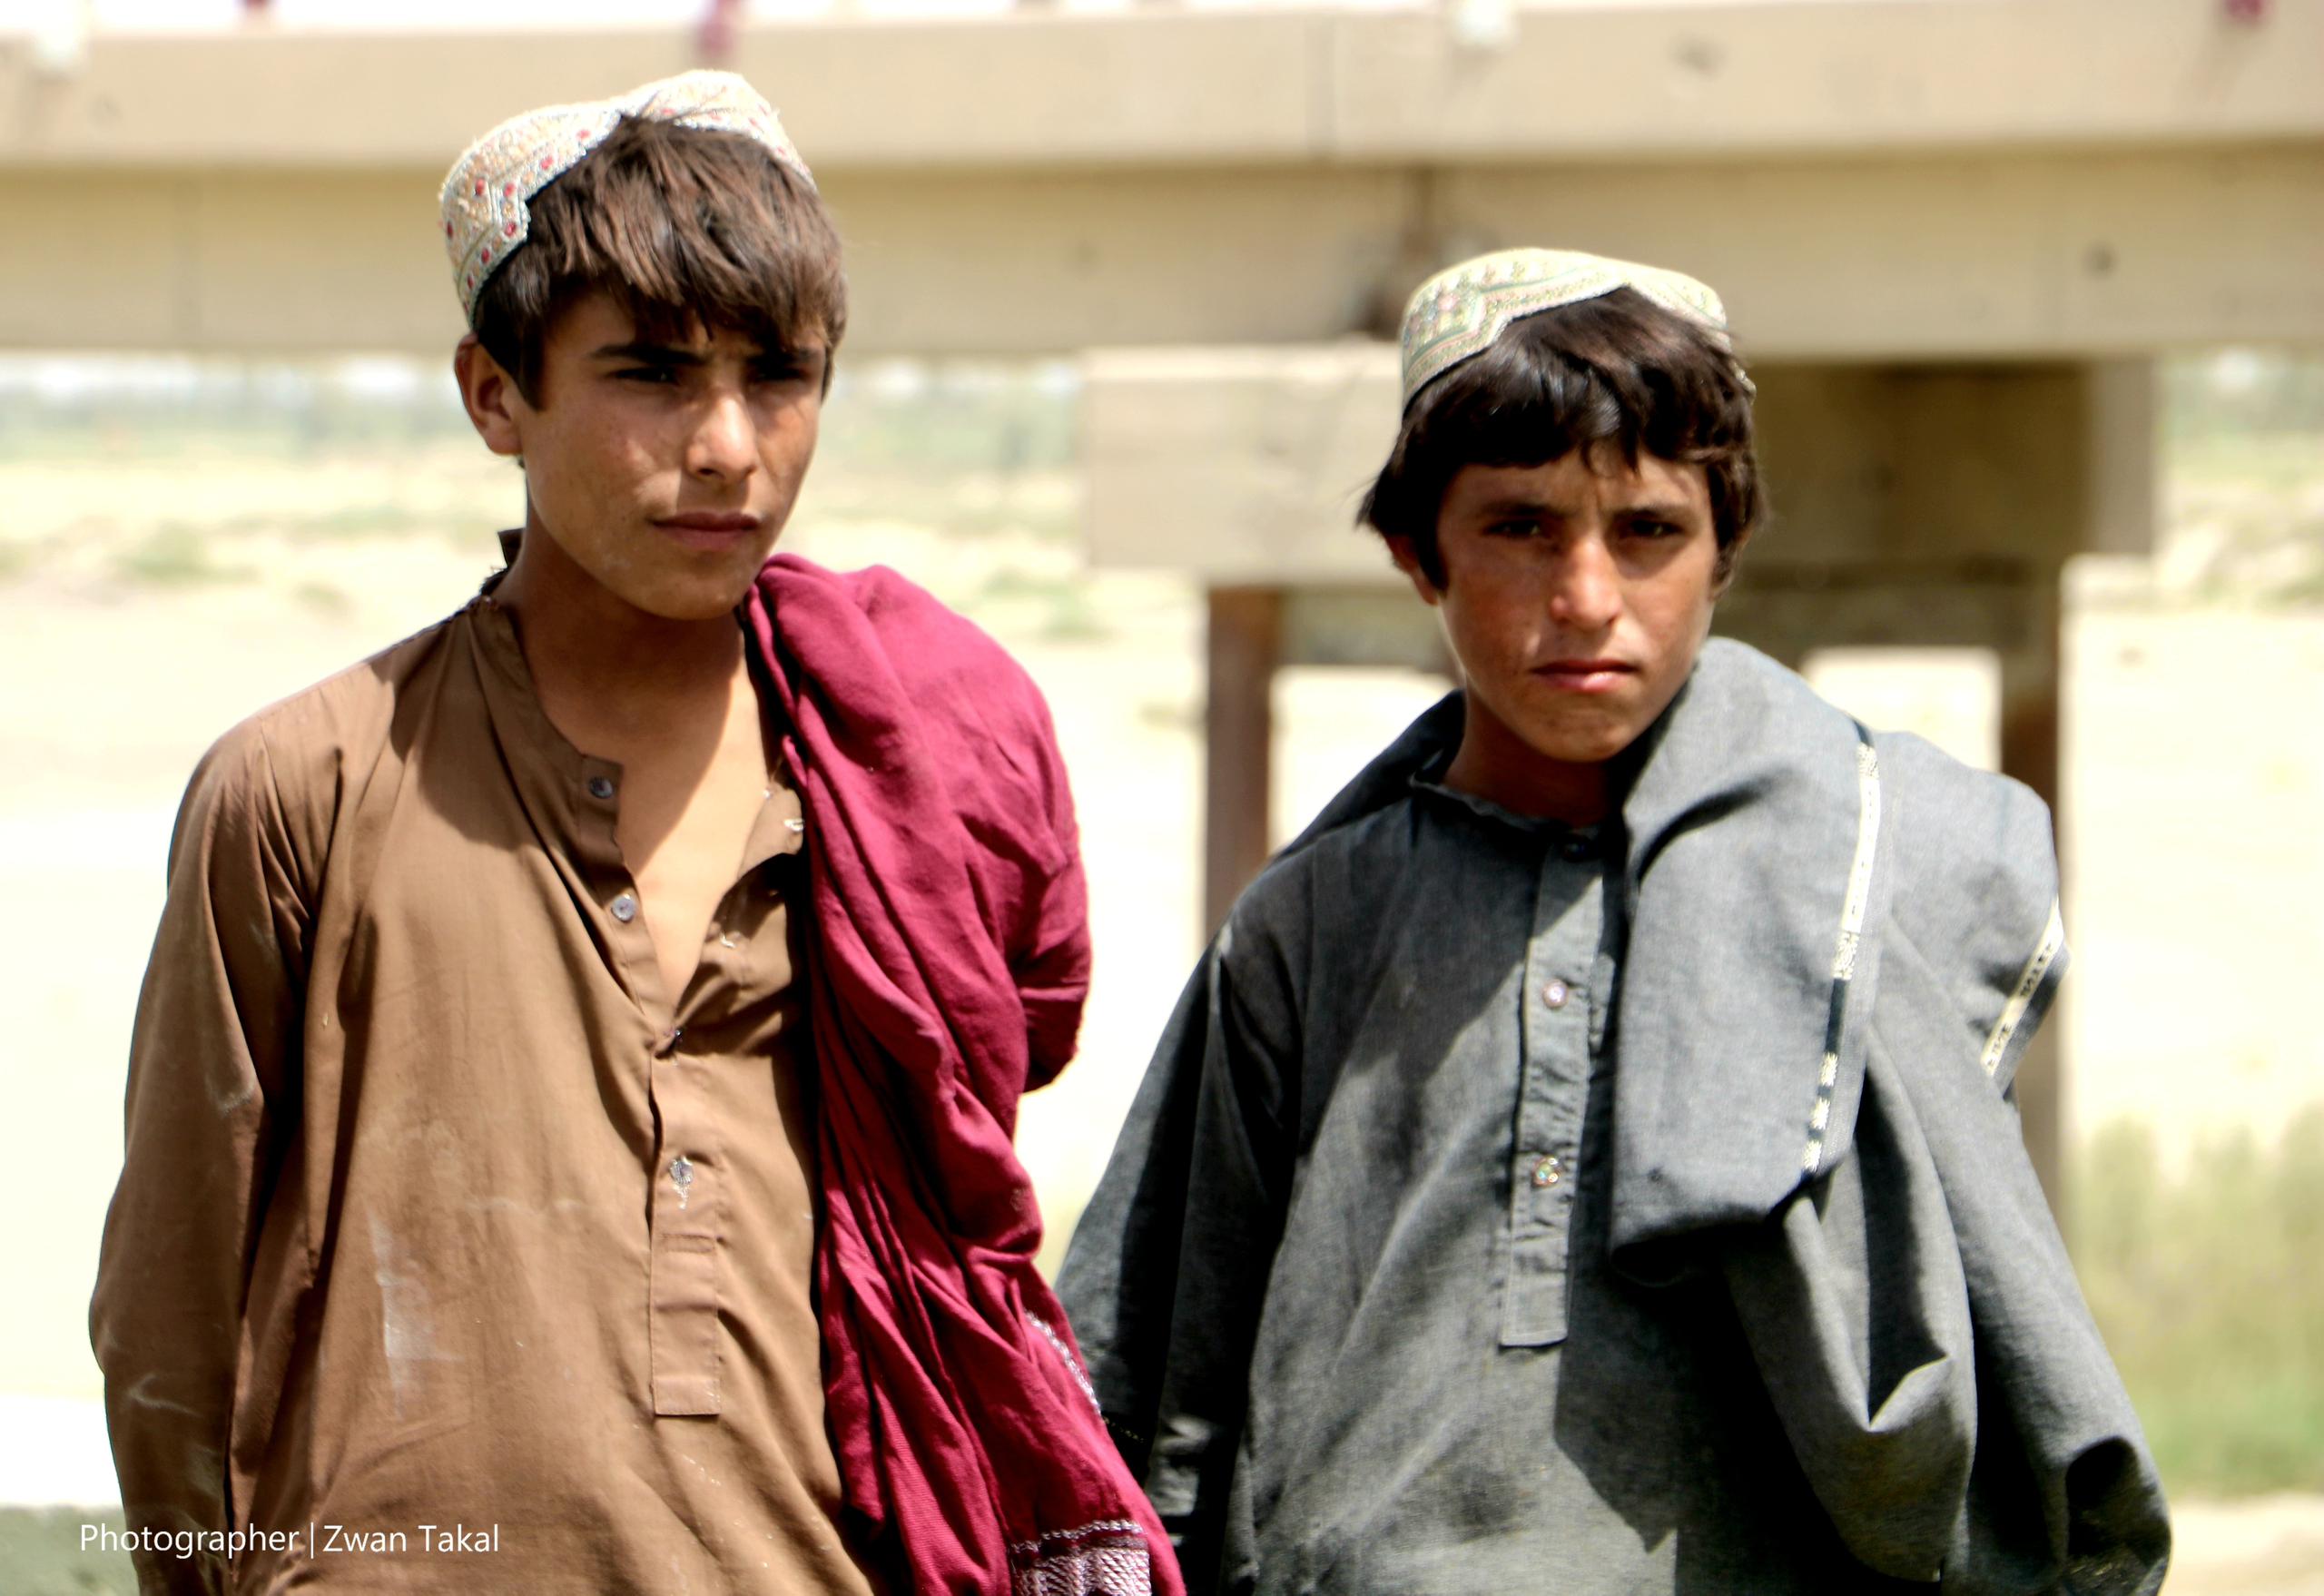 The image shows two Afghan teenagers, their faces reflecting youthful freshness, yet their clothes and eyes reveal their poverty.